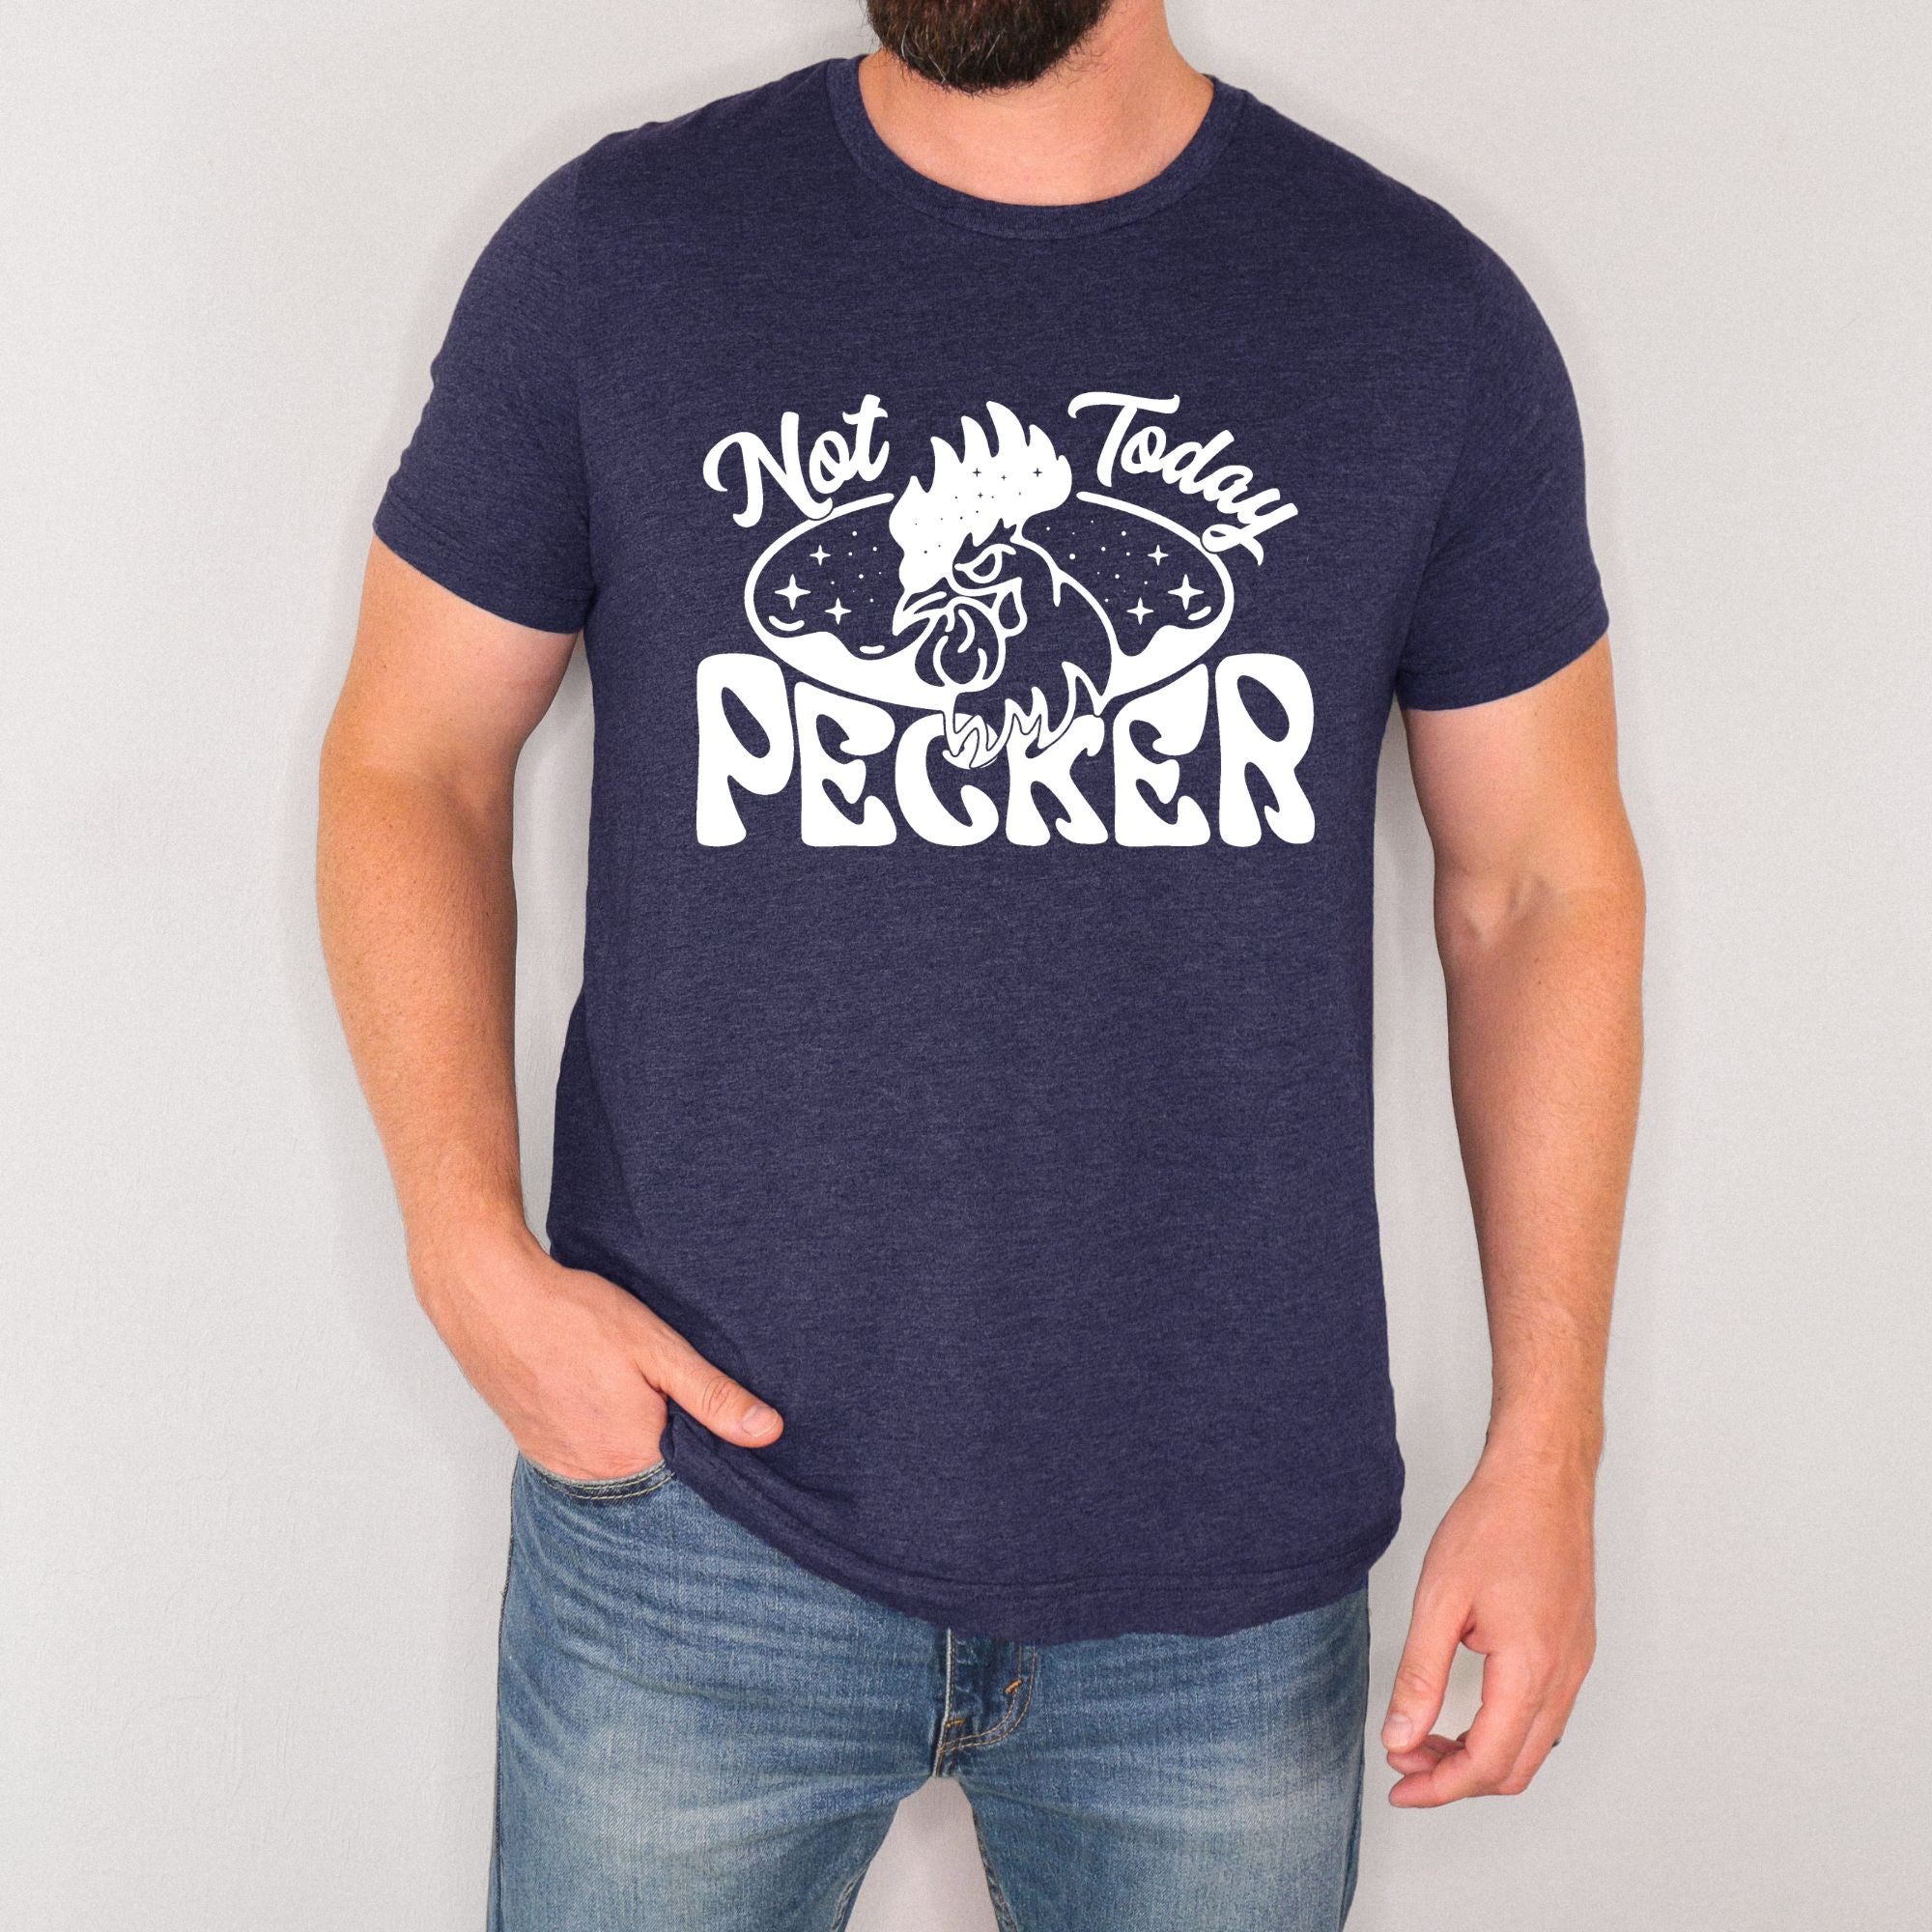 Not Today Pecker TShirt Nature Graphic Tee *UNISEX FIT*-208 Tees Wholesale, Idaho